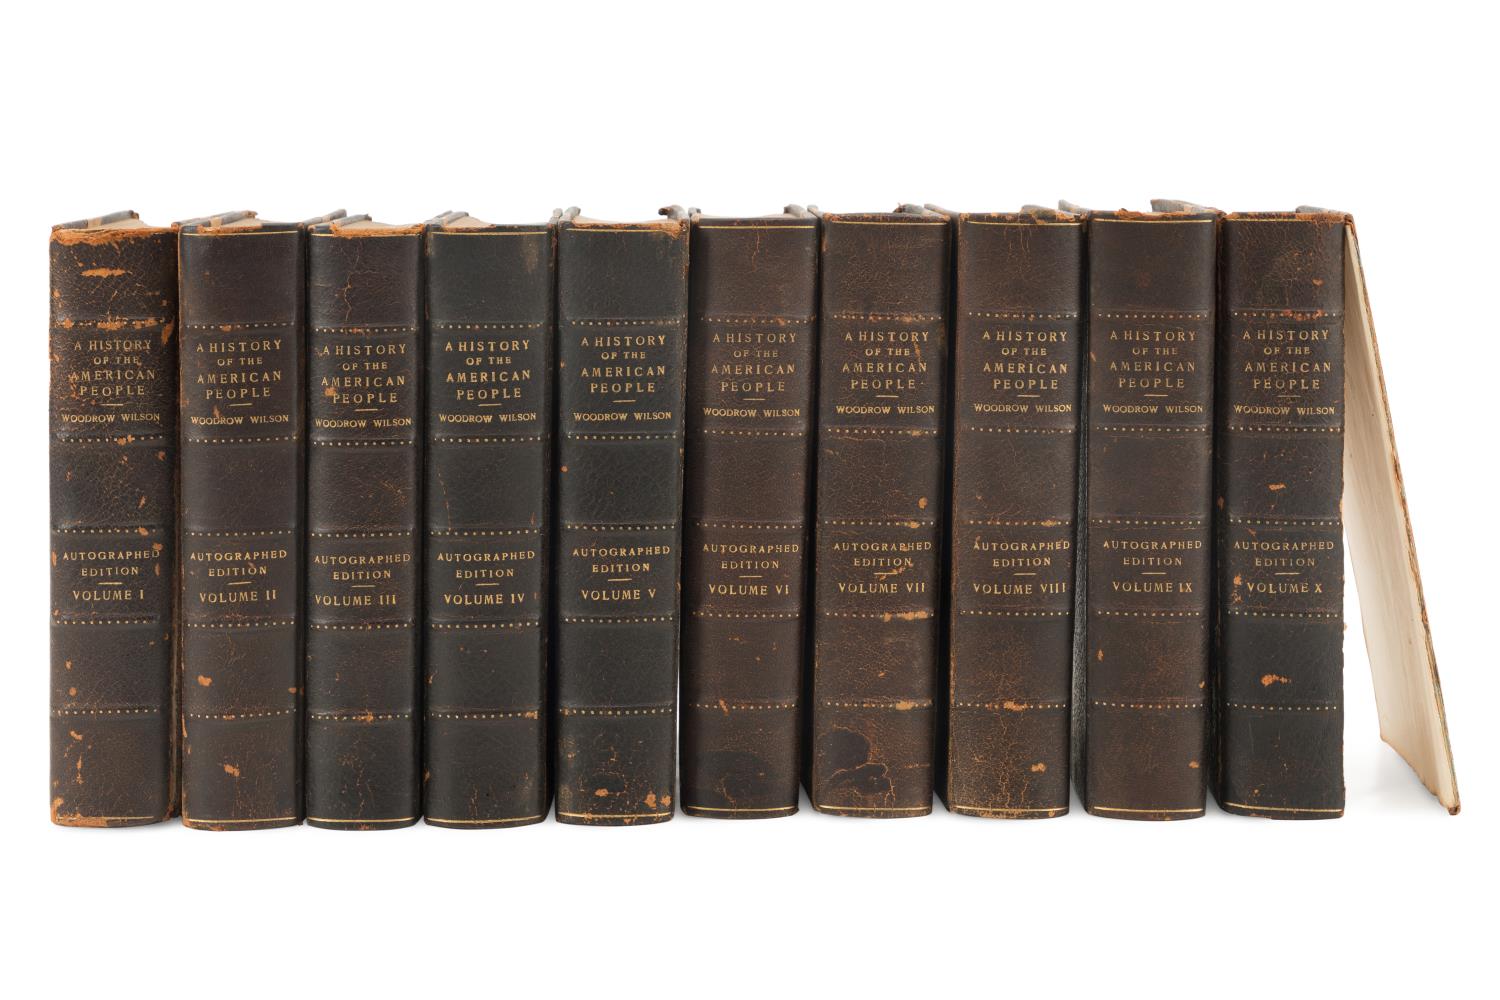 10 VOL,"A HISTORY OF THE AMERICAN